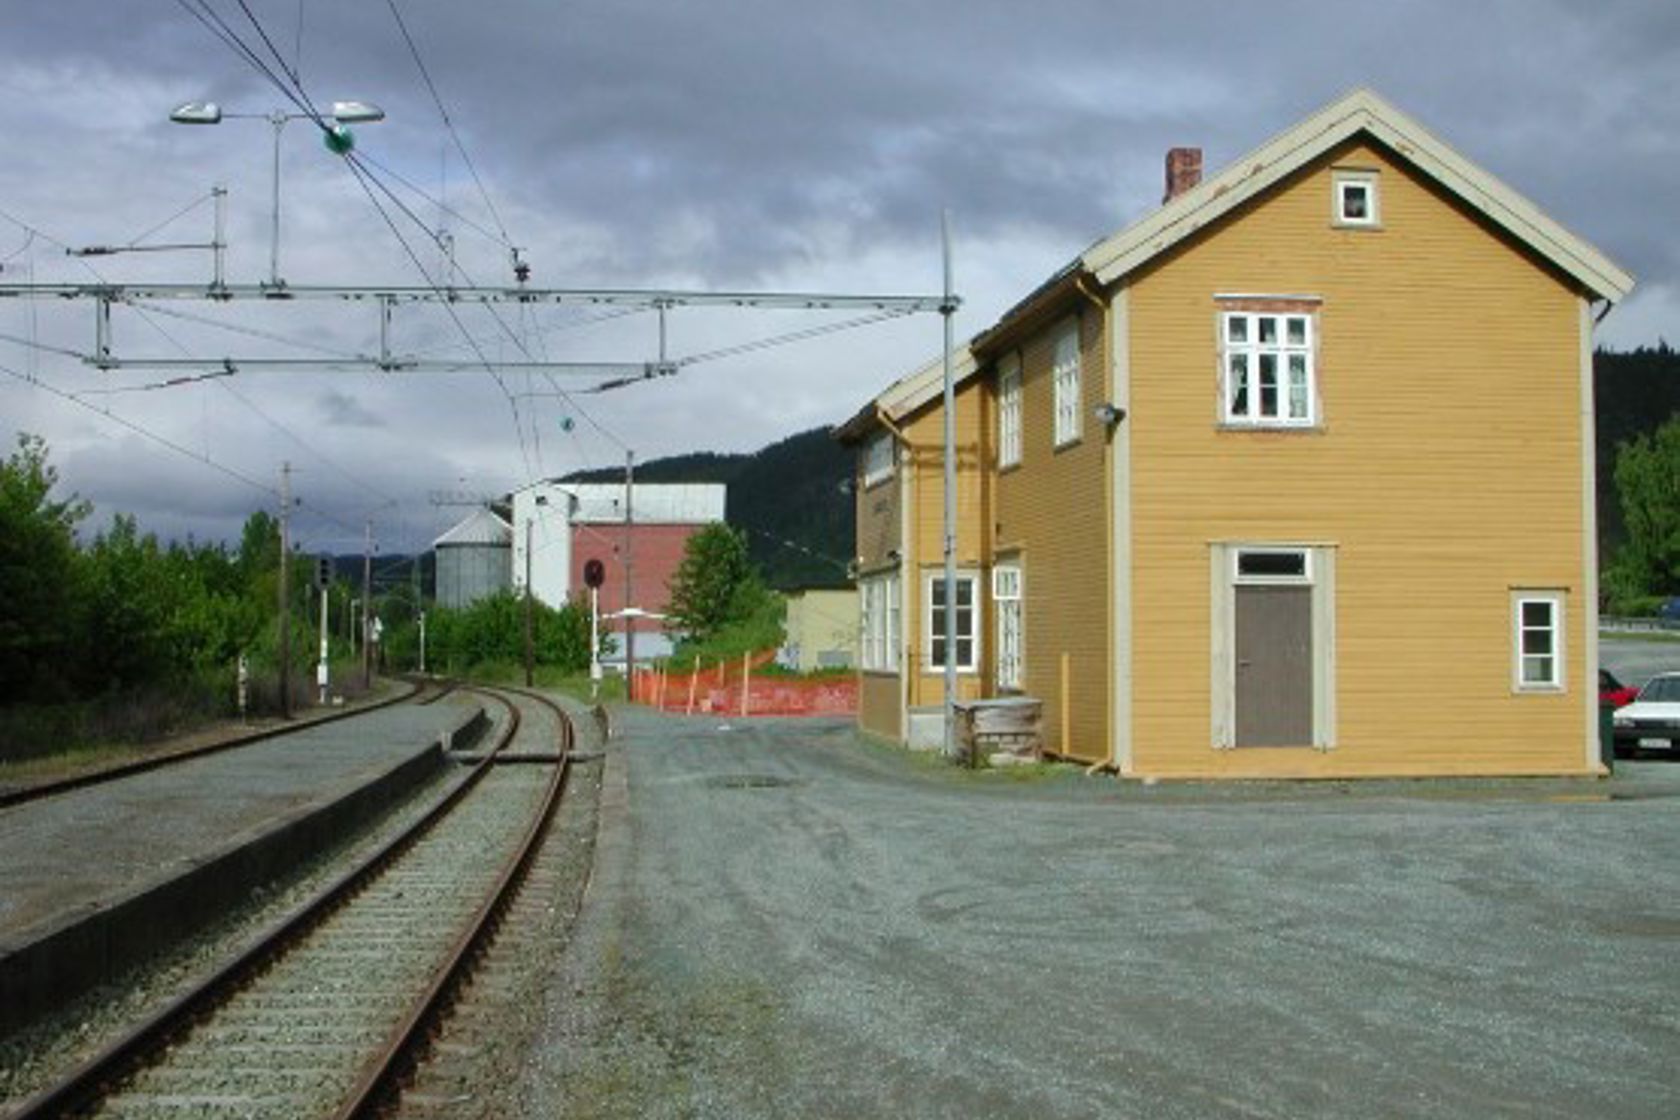 Exterior view of Lundamo station